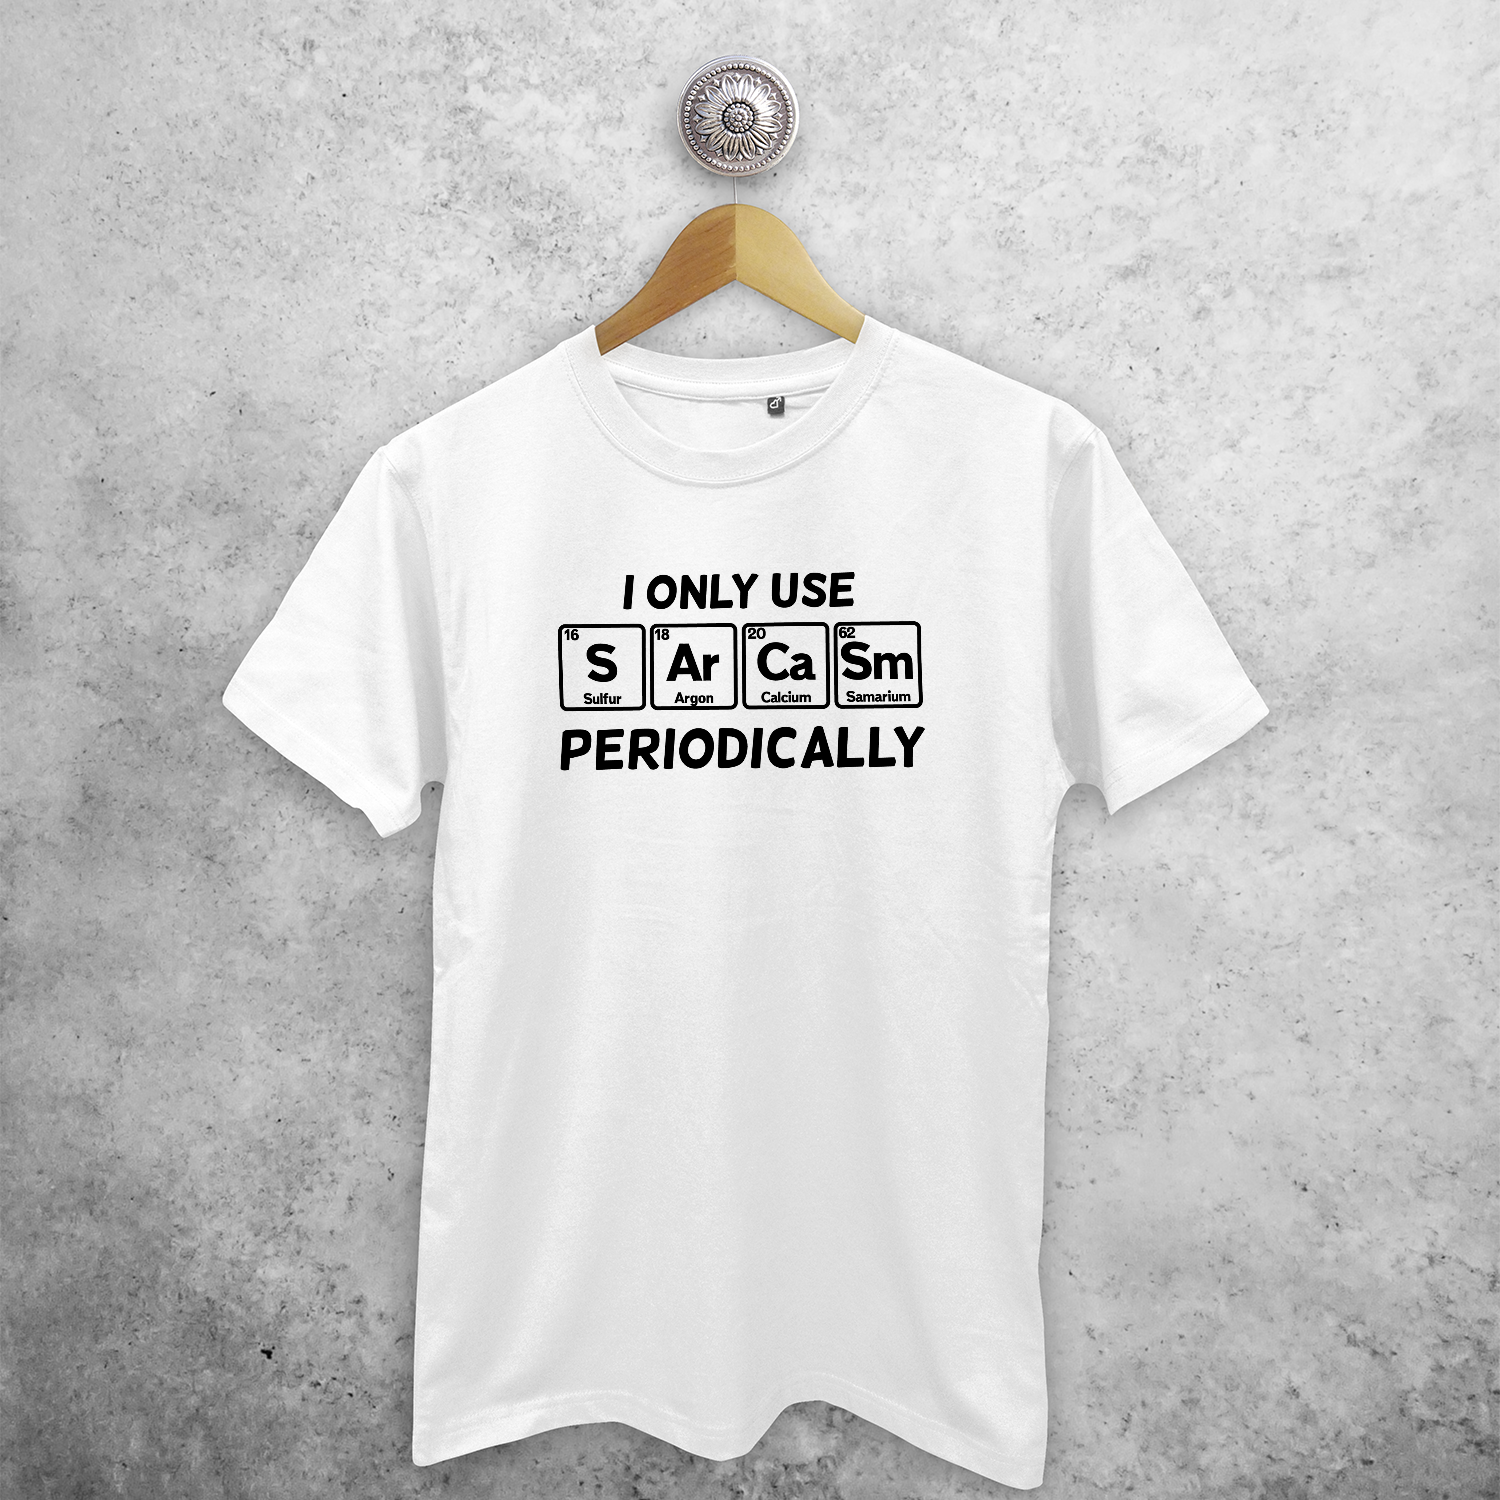 'I only use sarcasm periodically' adult shirt